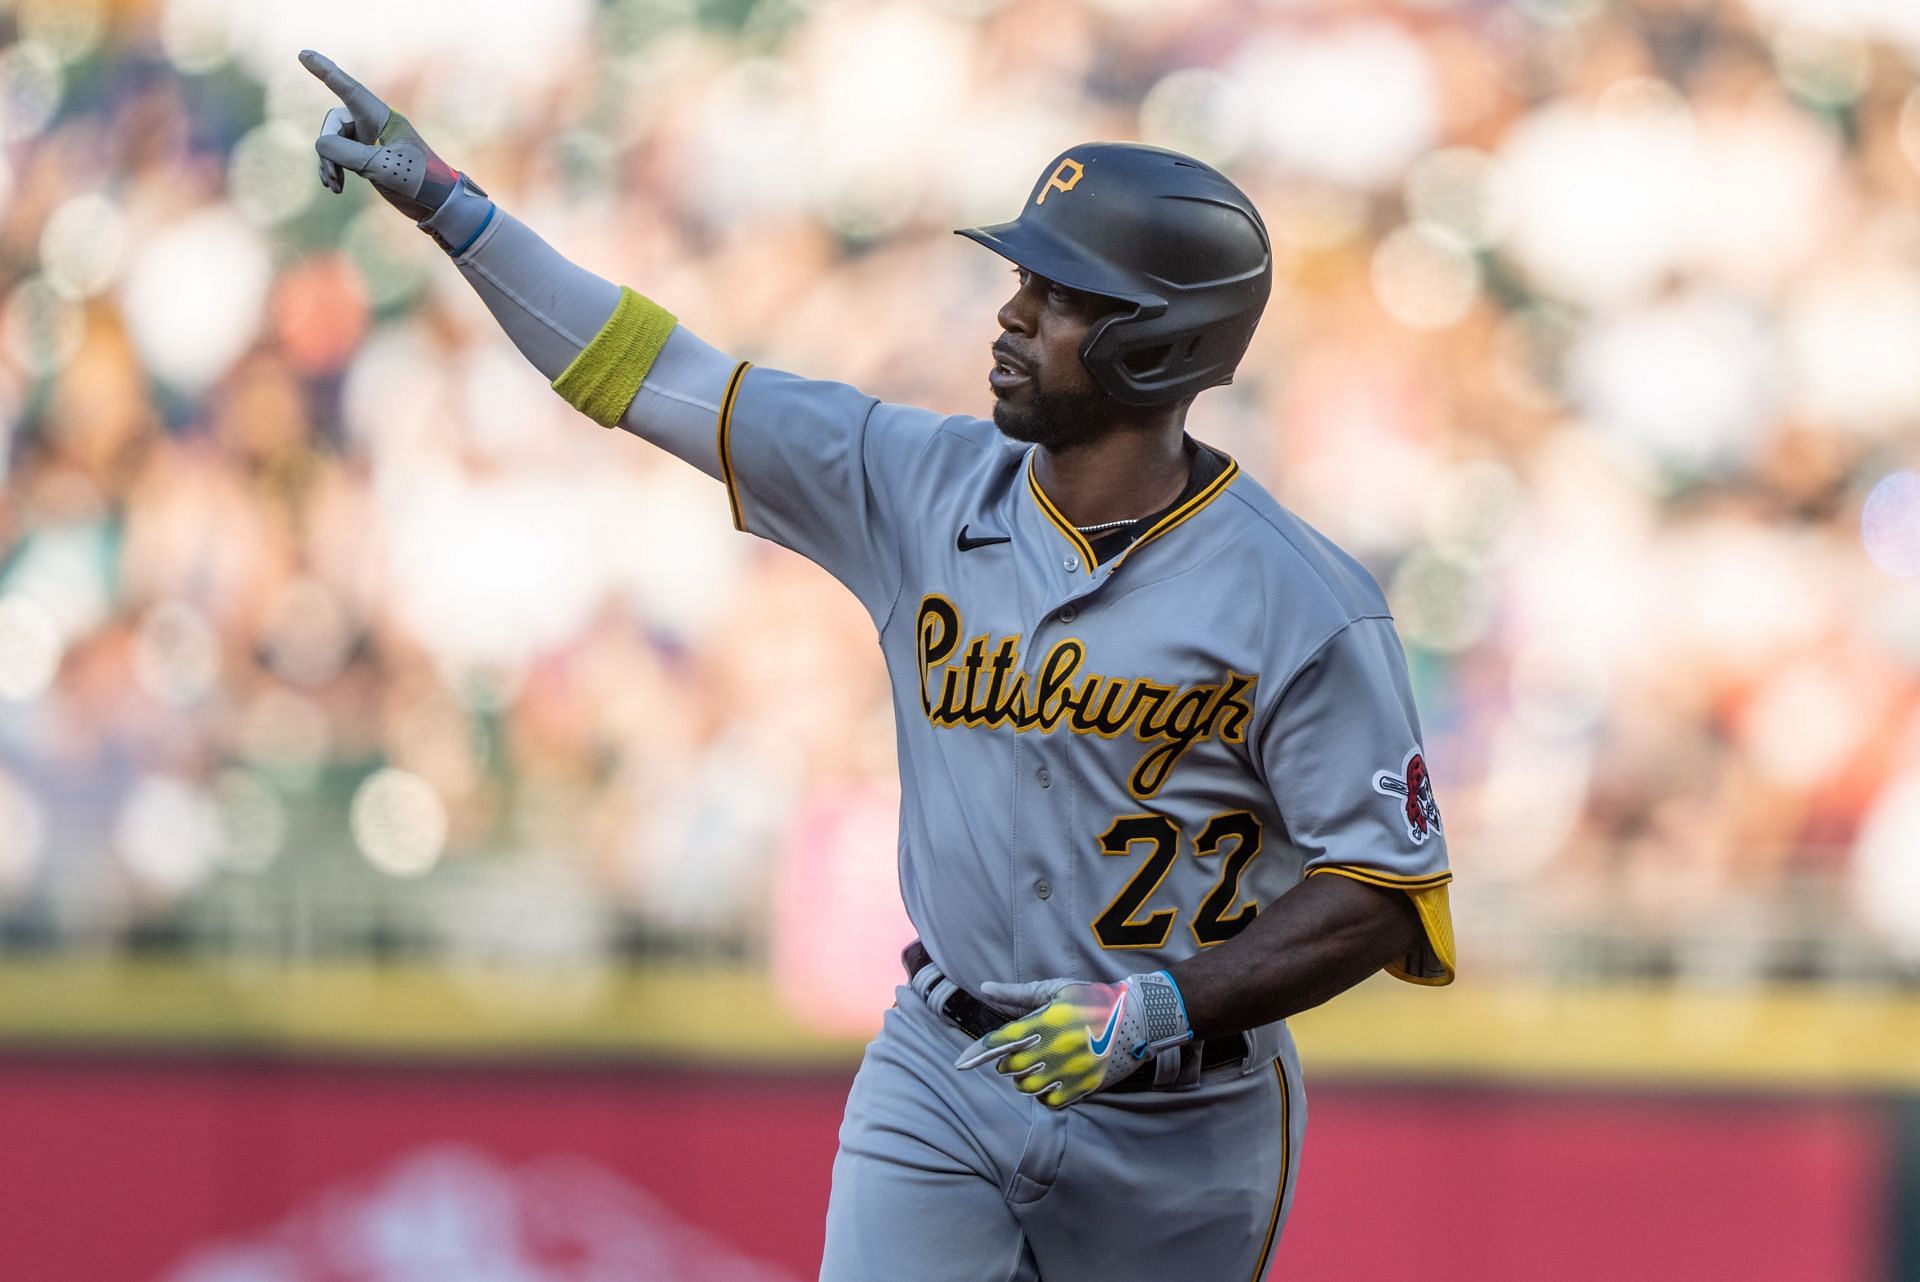 Andrew McCutchen, a franchise legend, is returning to the Pirates